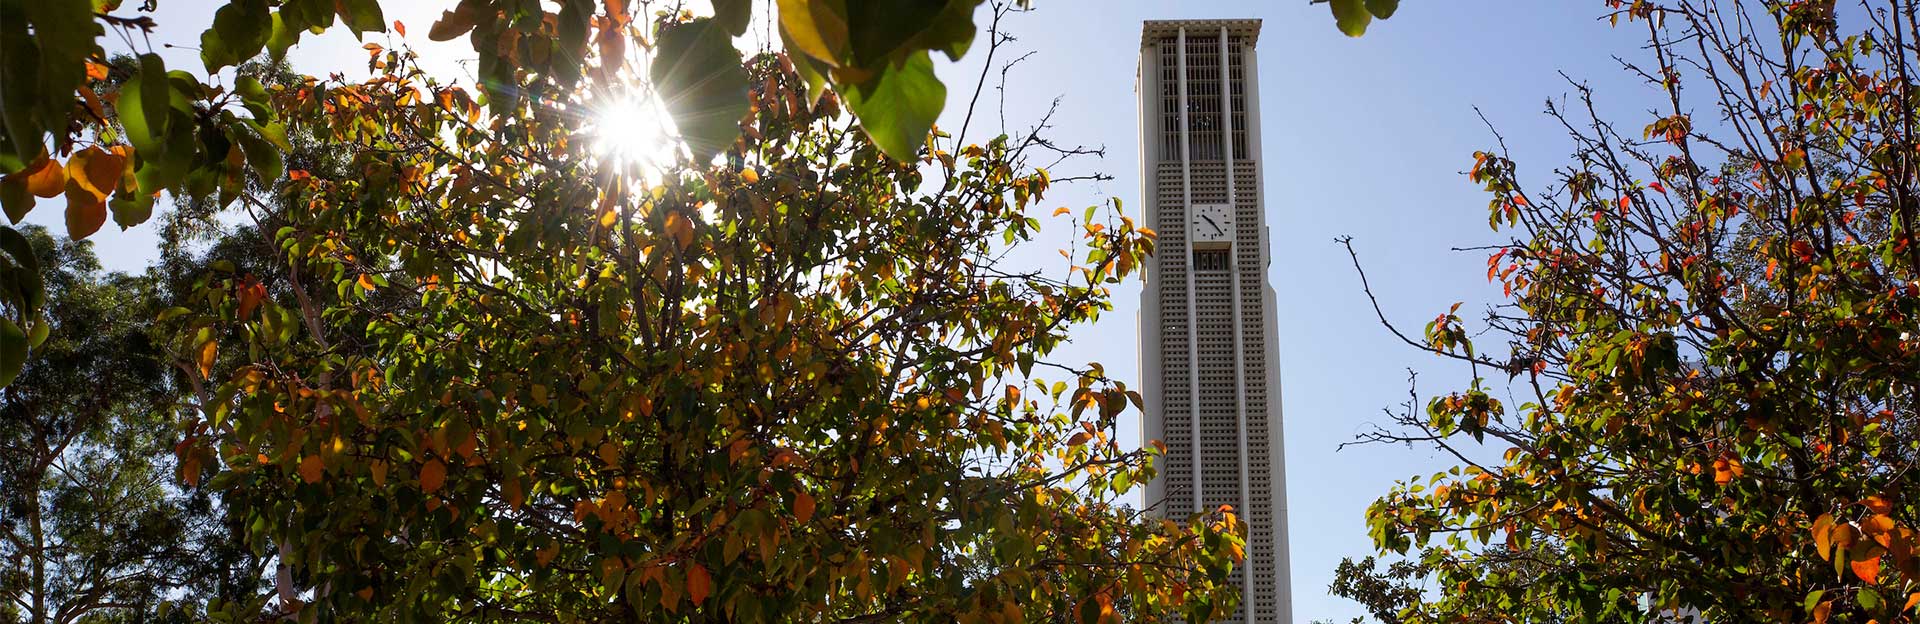 Fall colors, Bell Tower, CNAS Scholarships 2021-2022 (c) UCR/Stan Lim